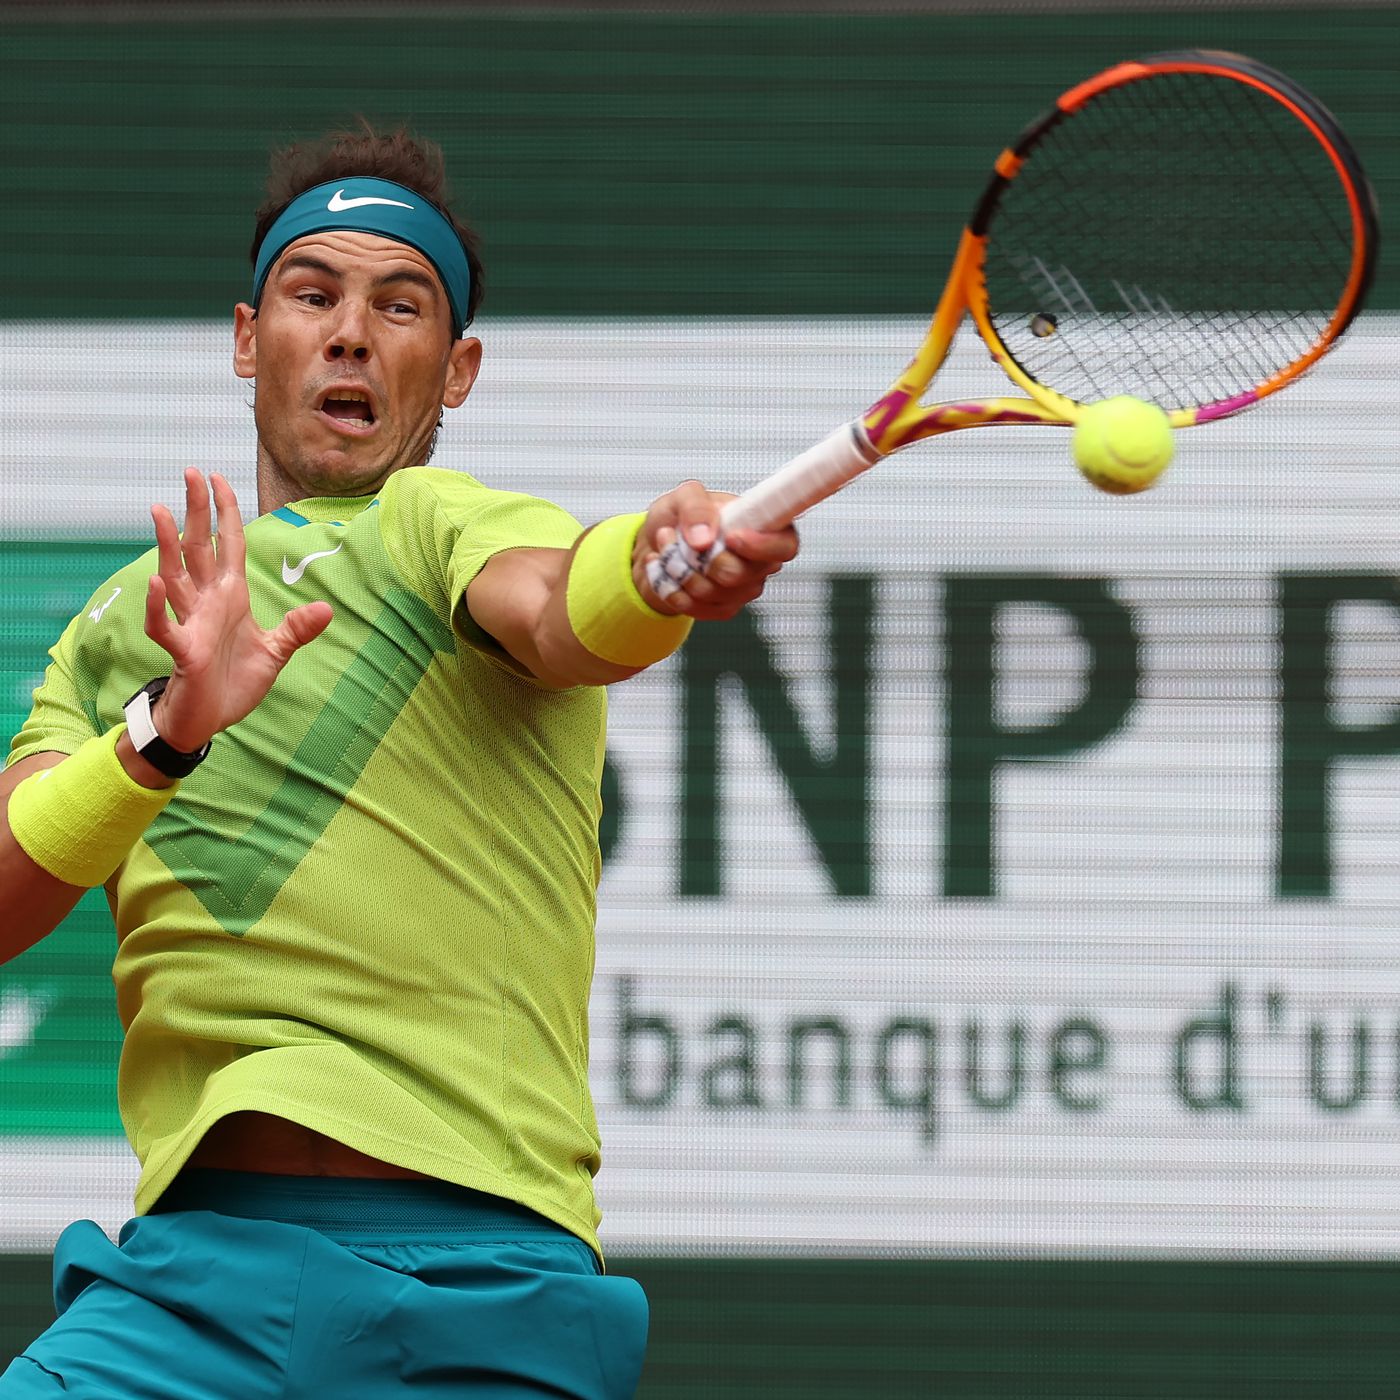 Rafael Nadal live stream: Match time, TV info, how to watch No. 5 seed in 2022 French Open second round